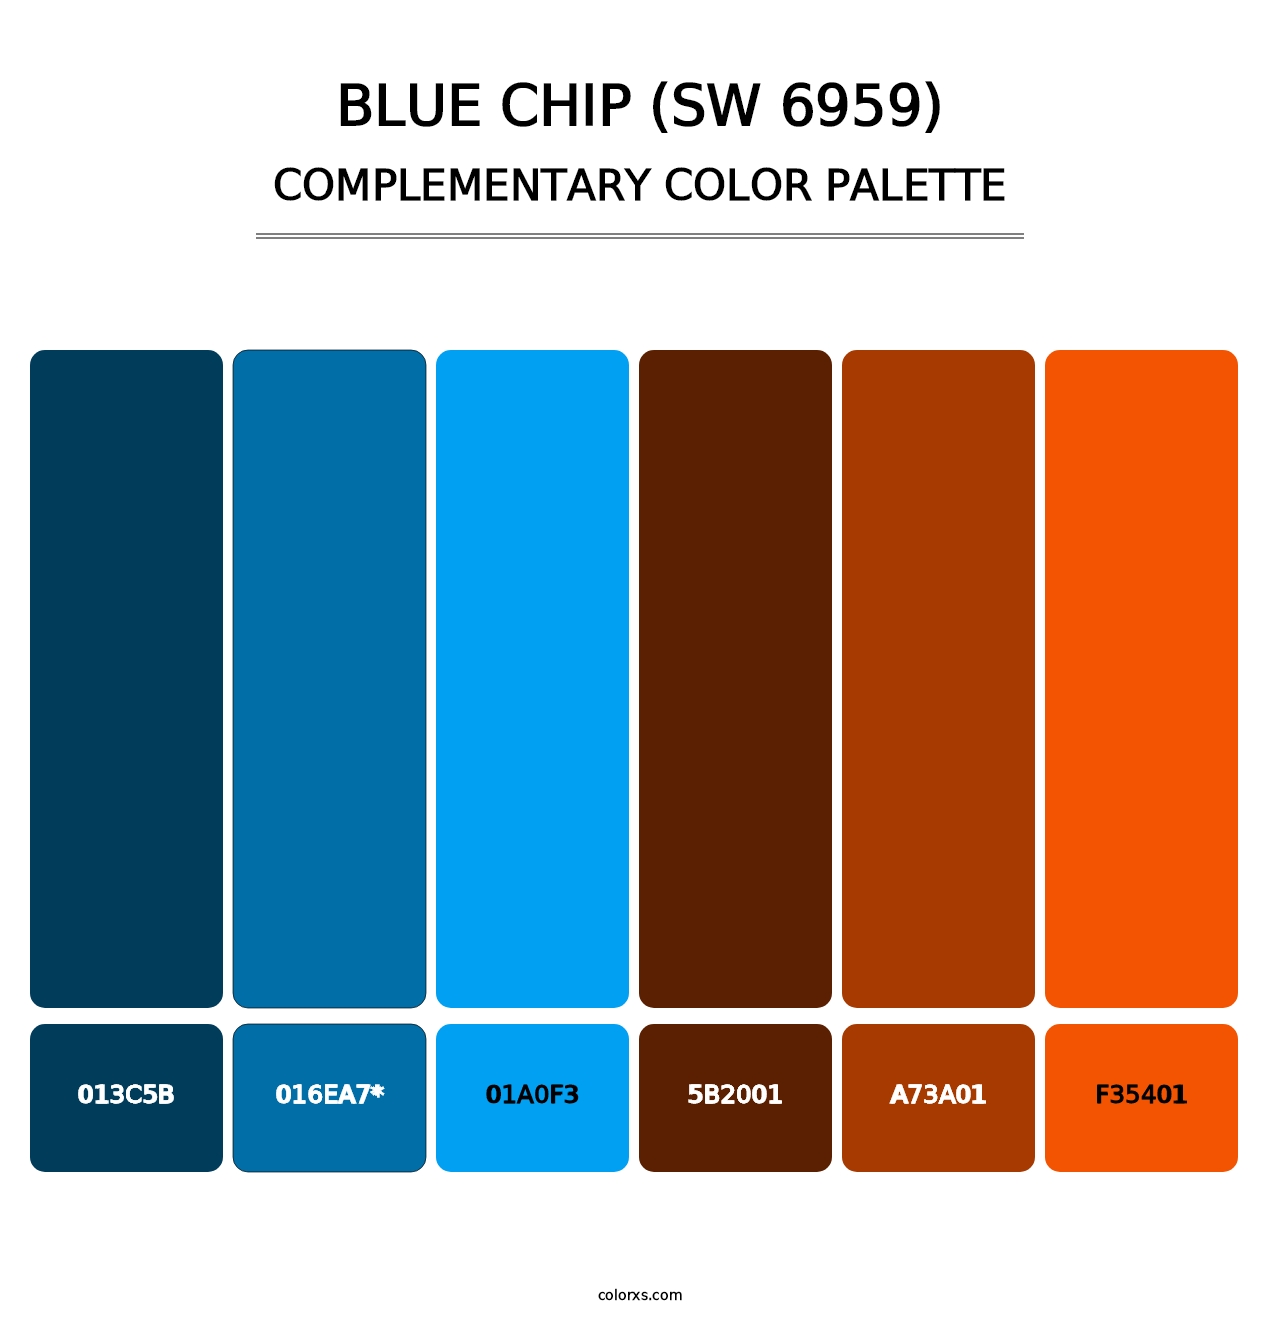 Blue Chip (SW 6959) - Complementary Color Palette